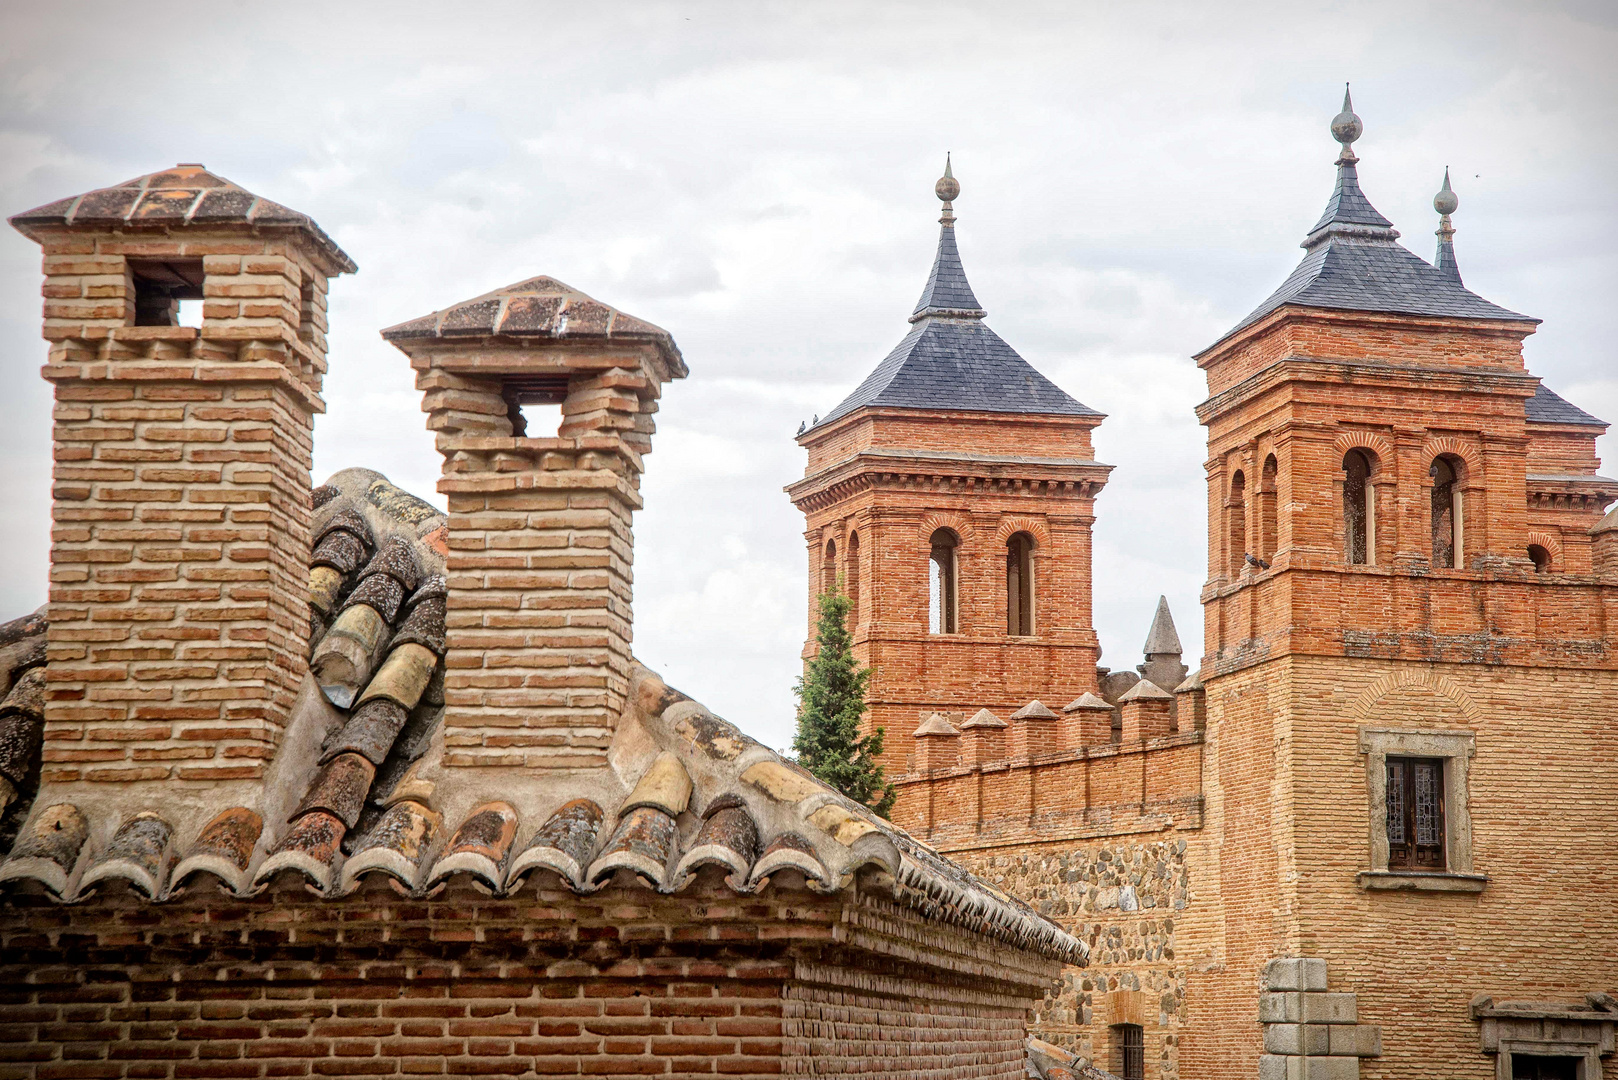 Chimneys and towers of Toledo